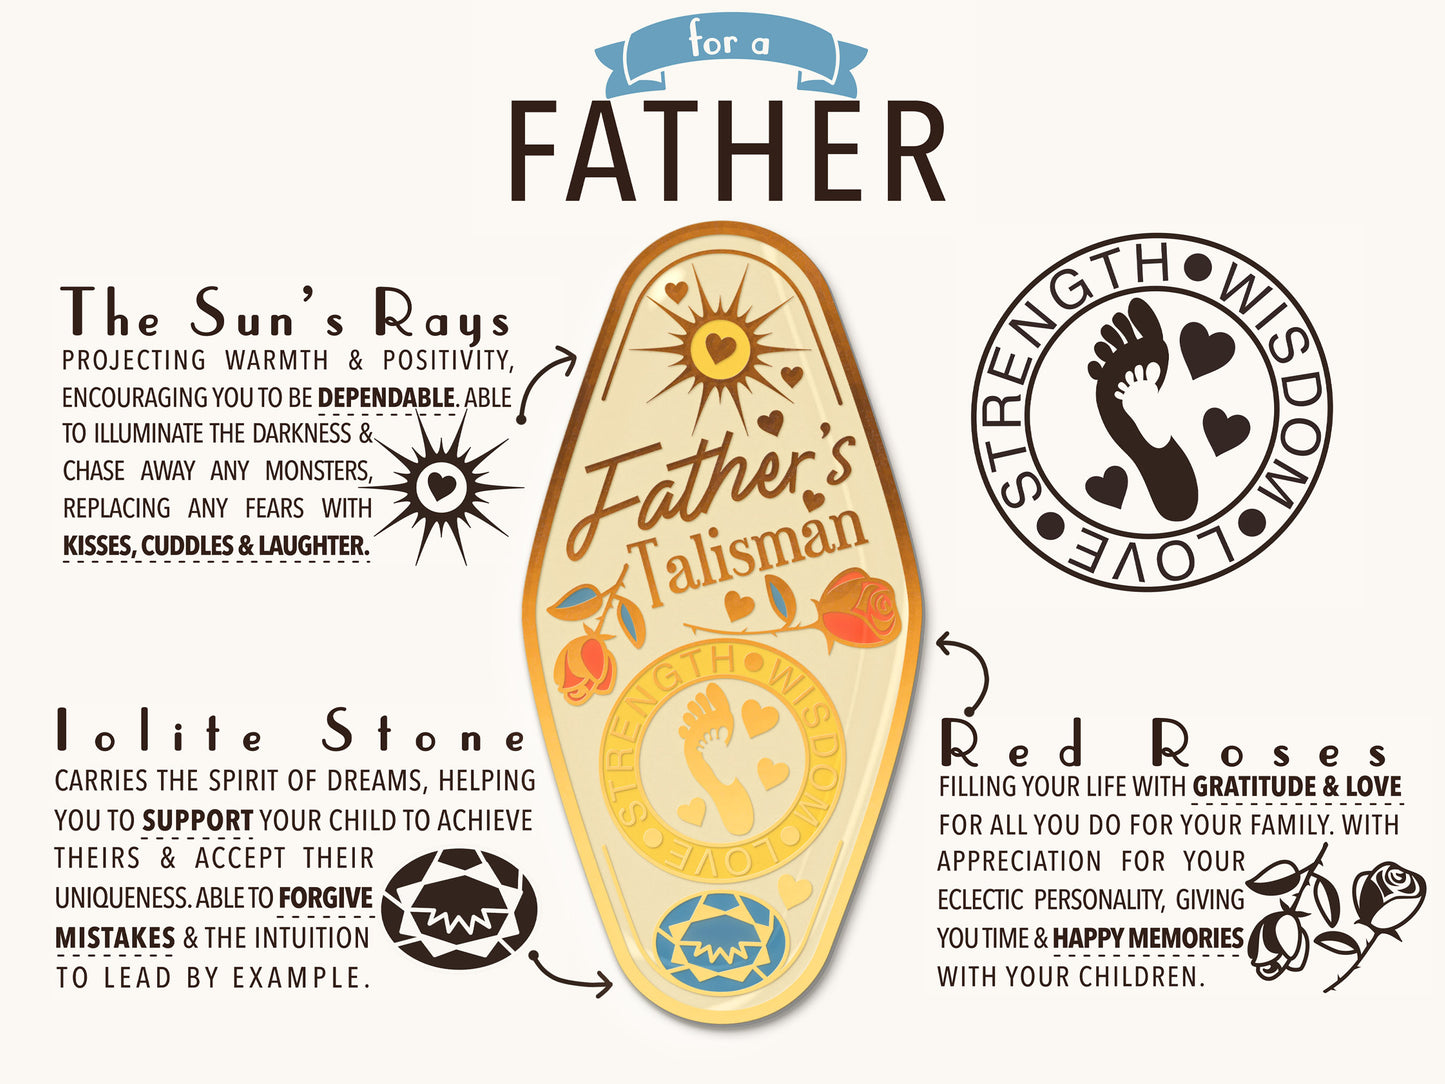 A illustrated diagram outline the symbolism of the different design elements of the for a Father's Talisman pin. Information includes the meaning of the Sun's rays, iolite stone and red roses